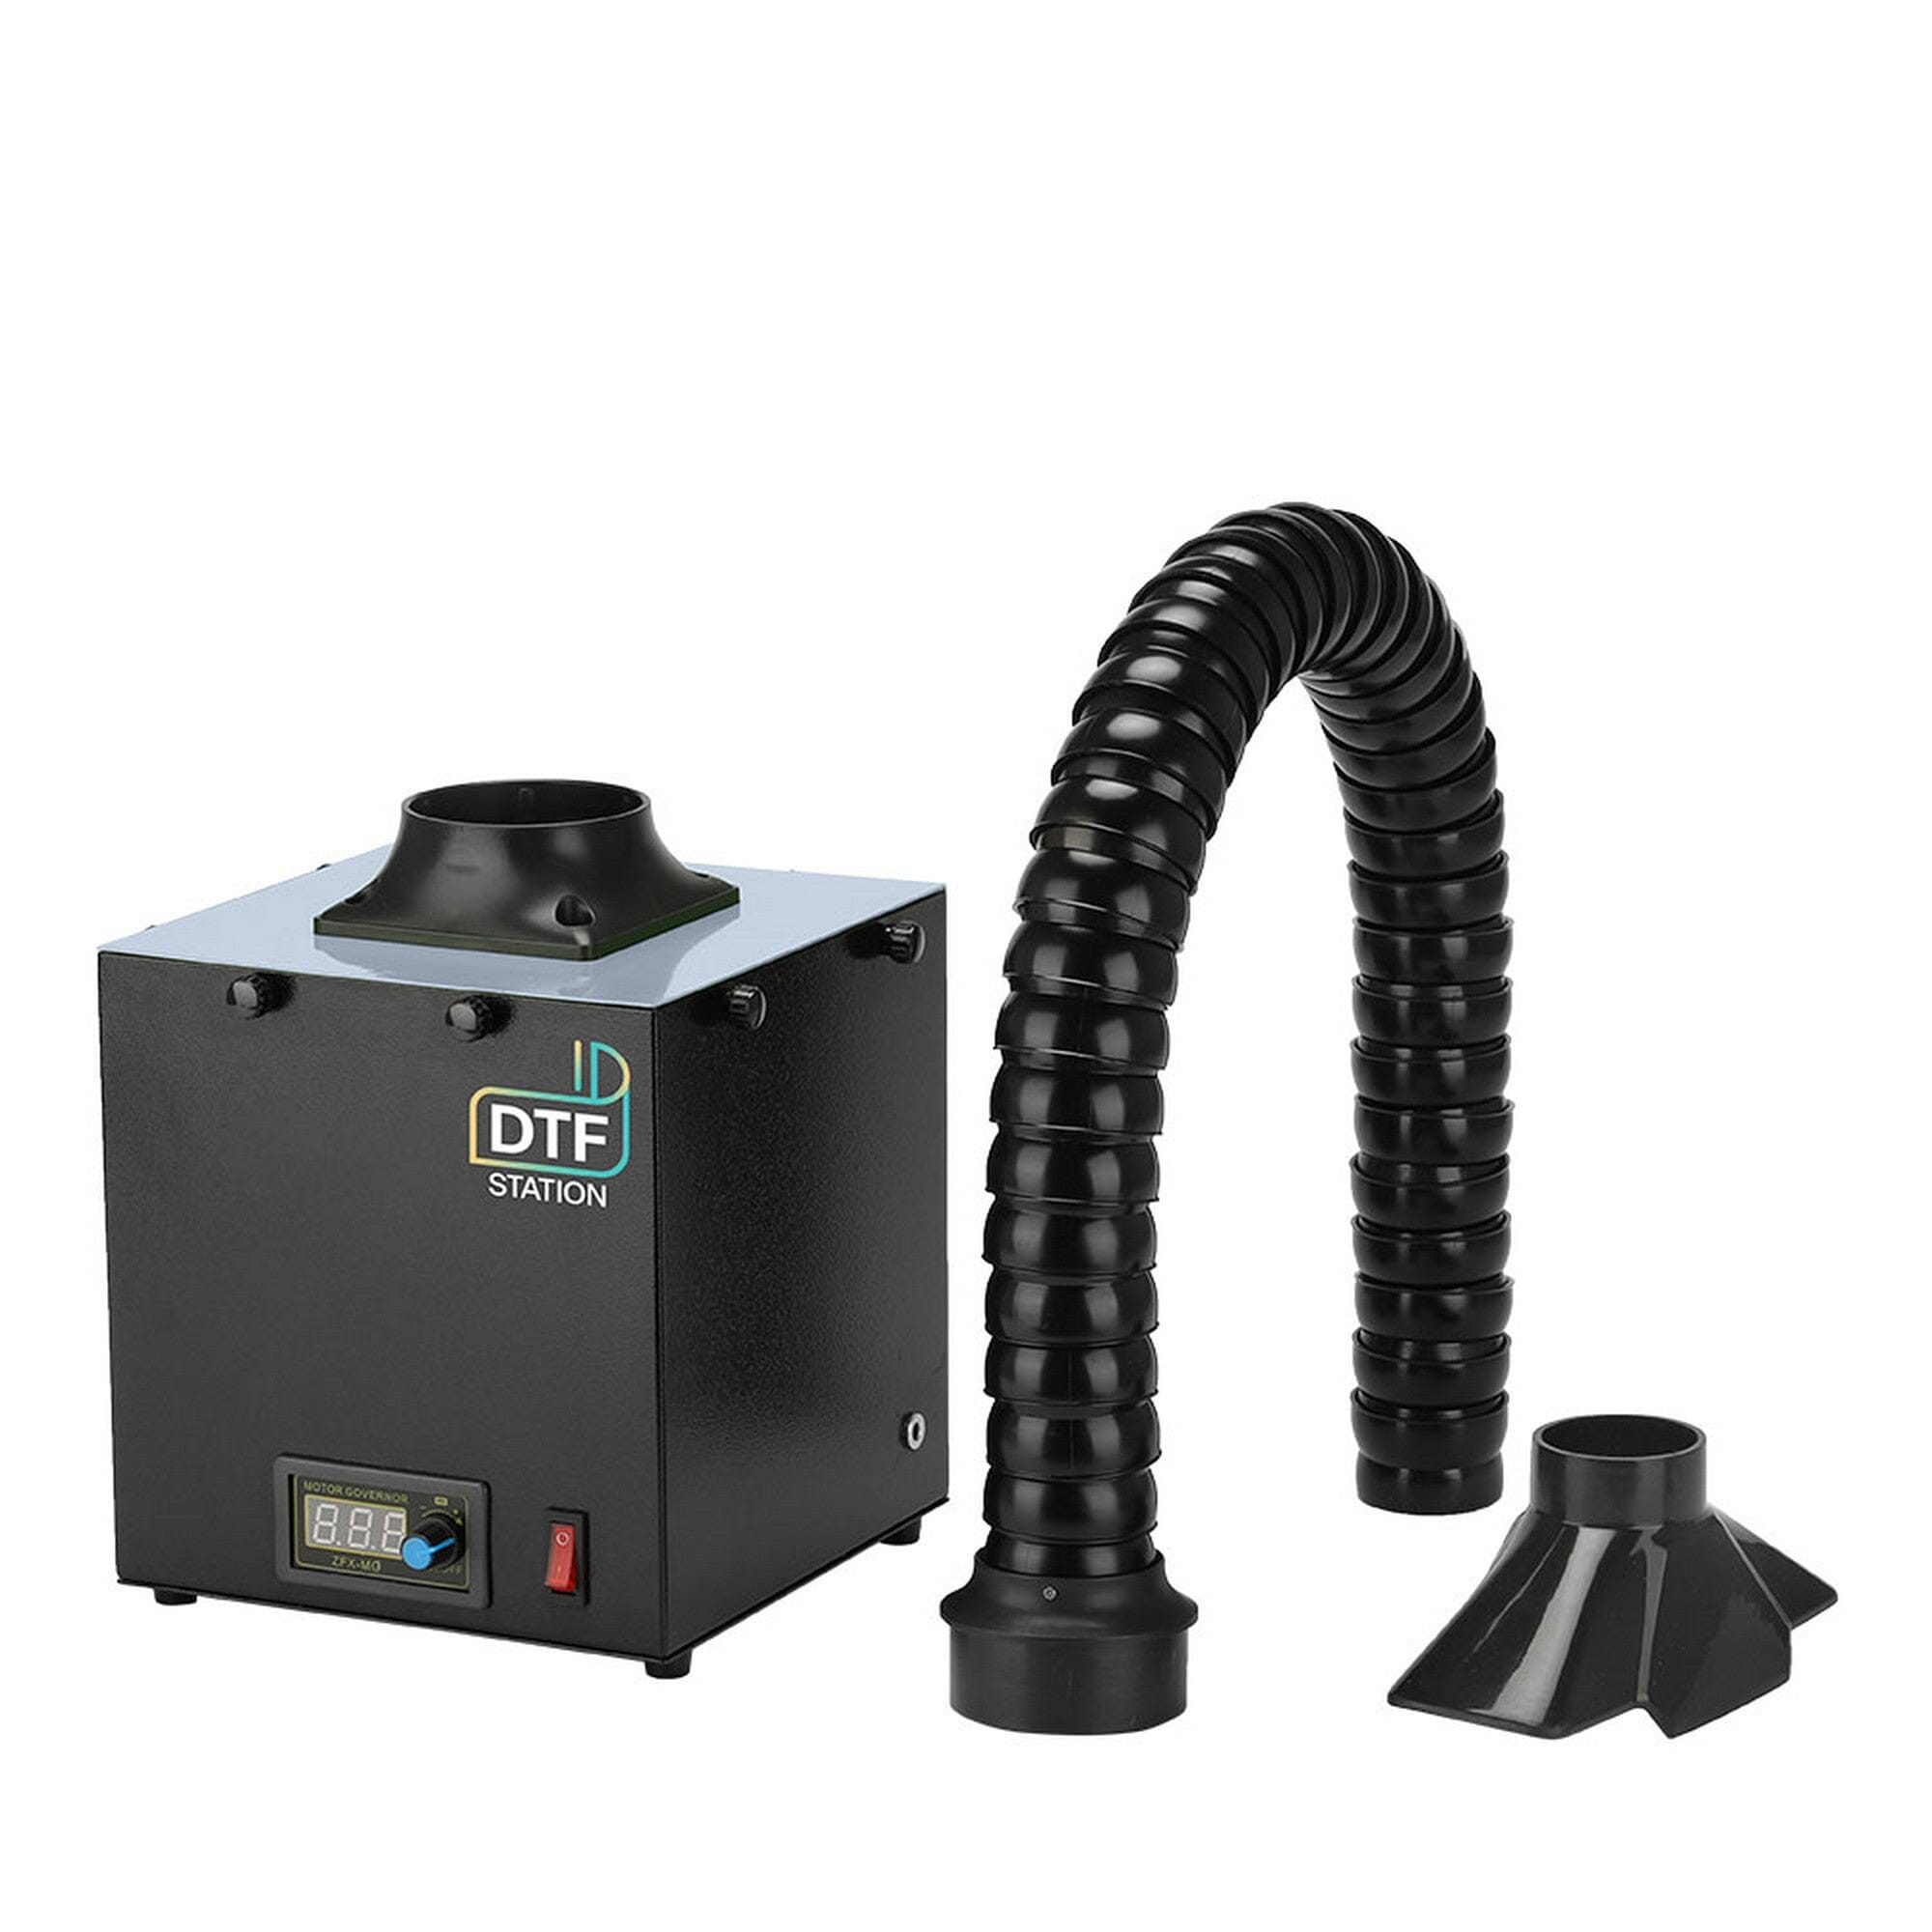 Prestige Mini Portable Air Purifier for DTF Curing Oven